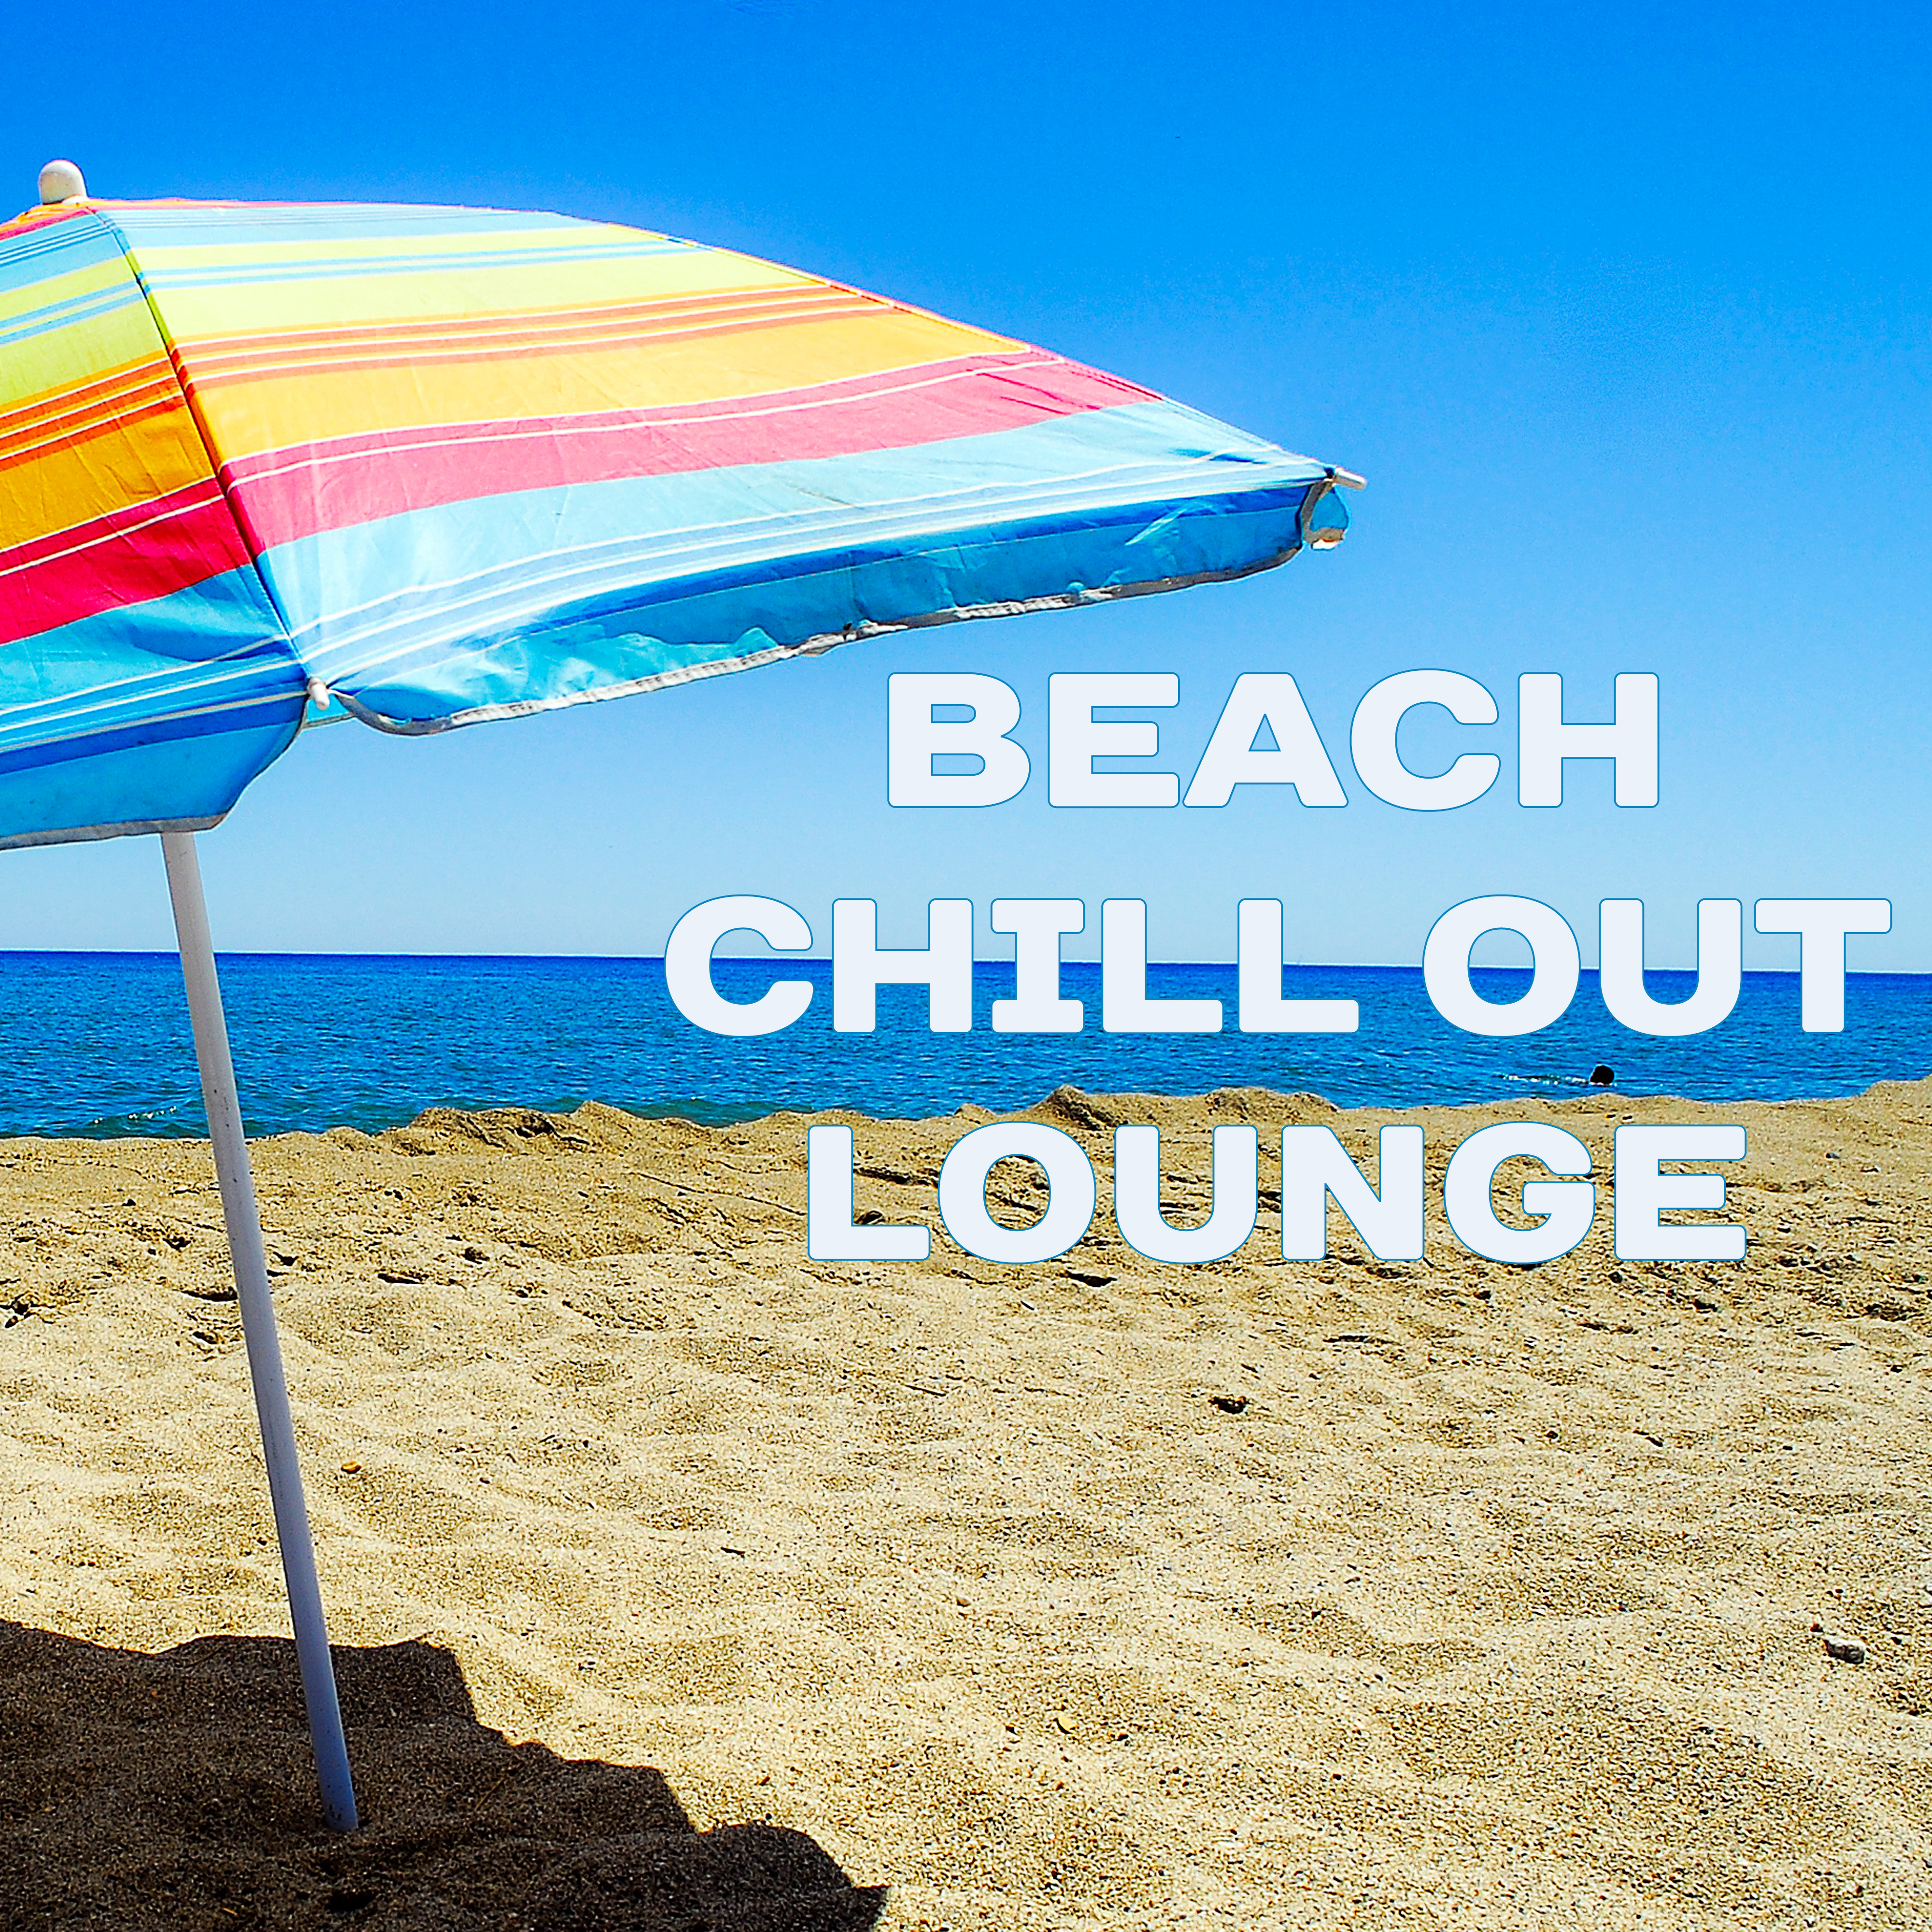 Beach Chill Out Lounge  Tropical Sand, Summer Beach Relaxation, Music to Rest  Relax, Holiday Vibes